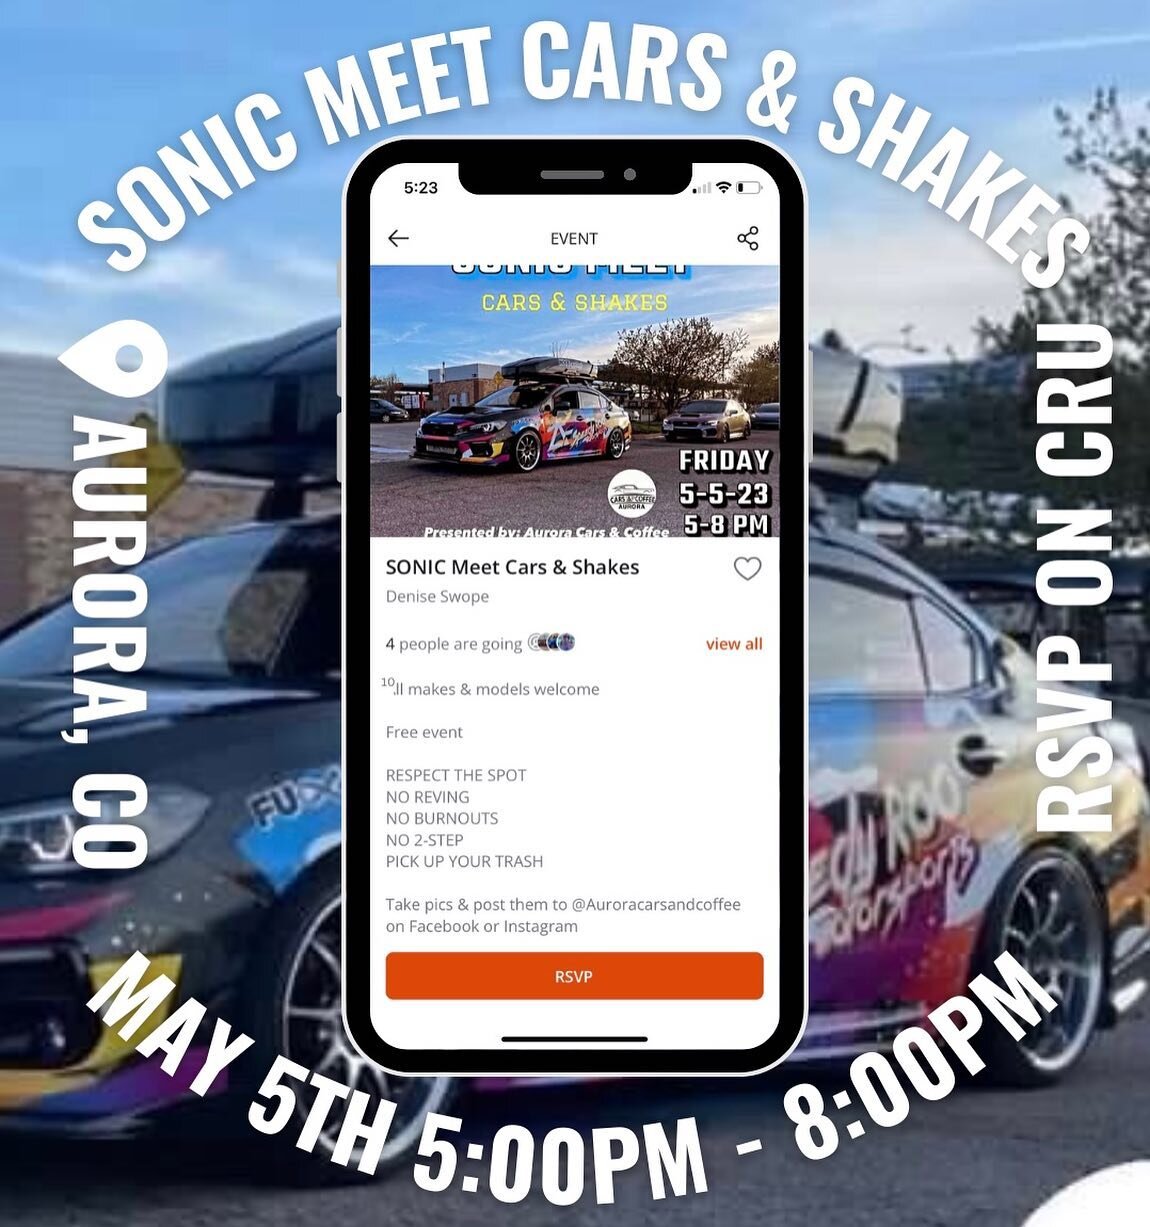 This Friday May 5th @auroracarsandcoffee 

Don&rsquo;t miss out! Go RSVP and find all the details on CRU App! 

Download for free on the App Store and Google Play Store! 

#CRUapp #CRUcars #CRUfam #CRUcommunity #CRU #carmeet #carapp #cars #carsandcof